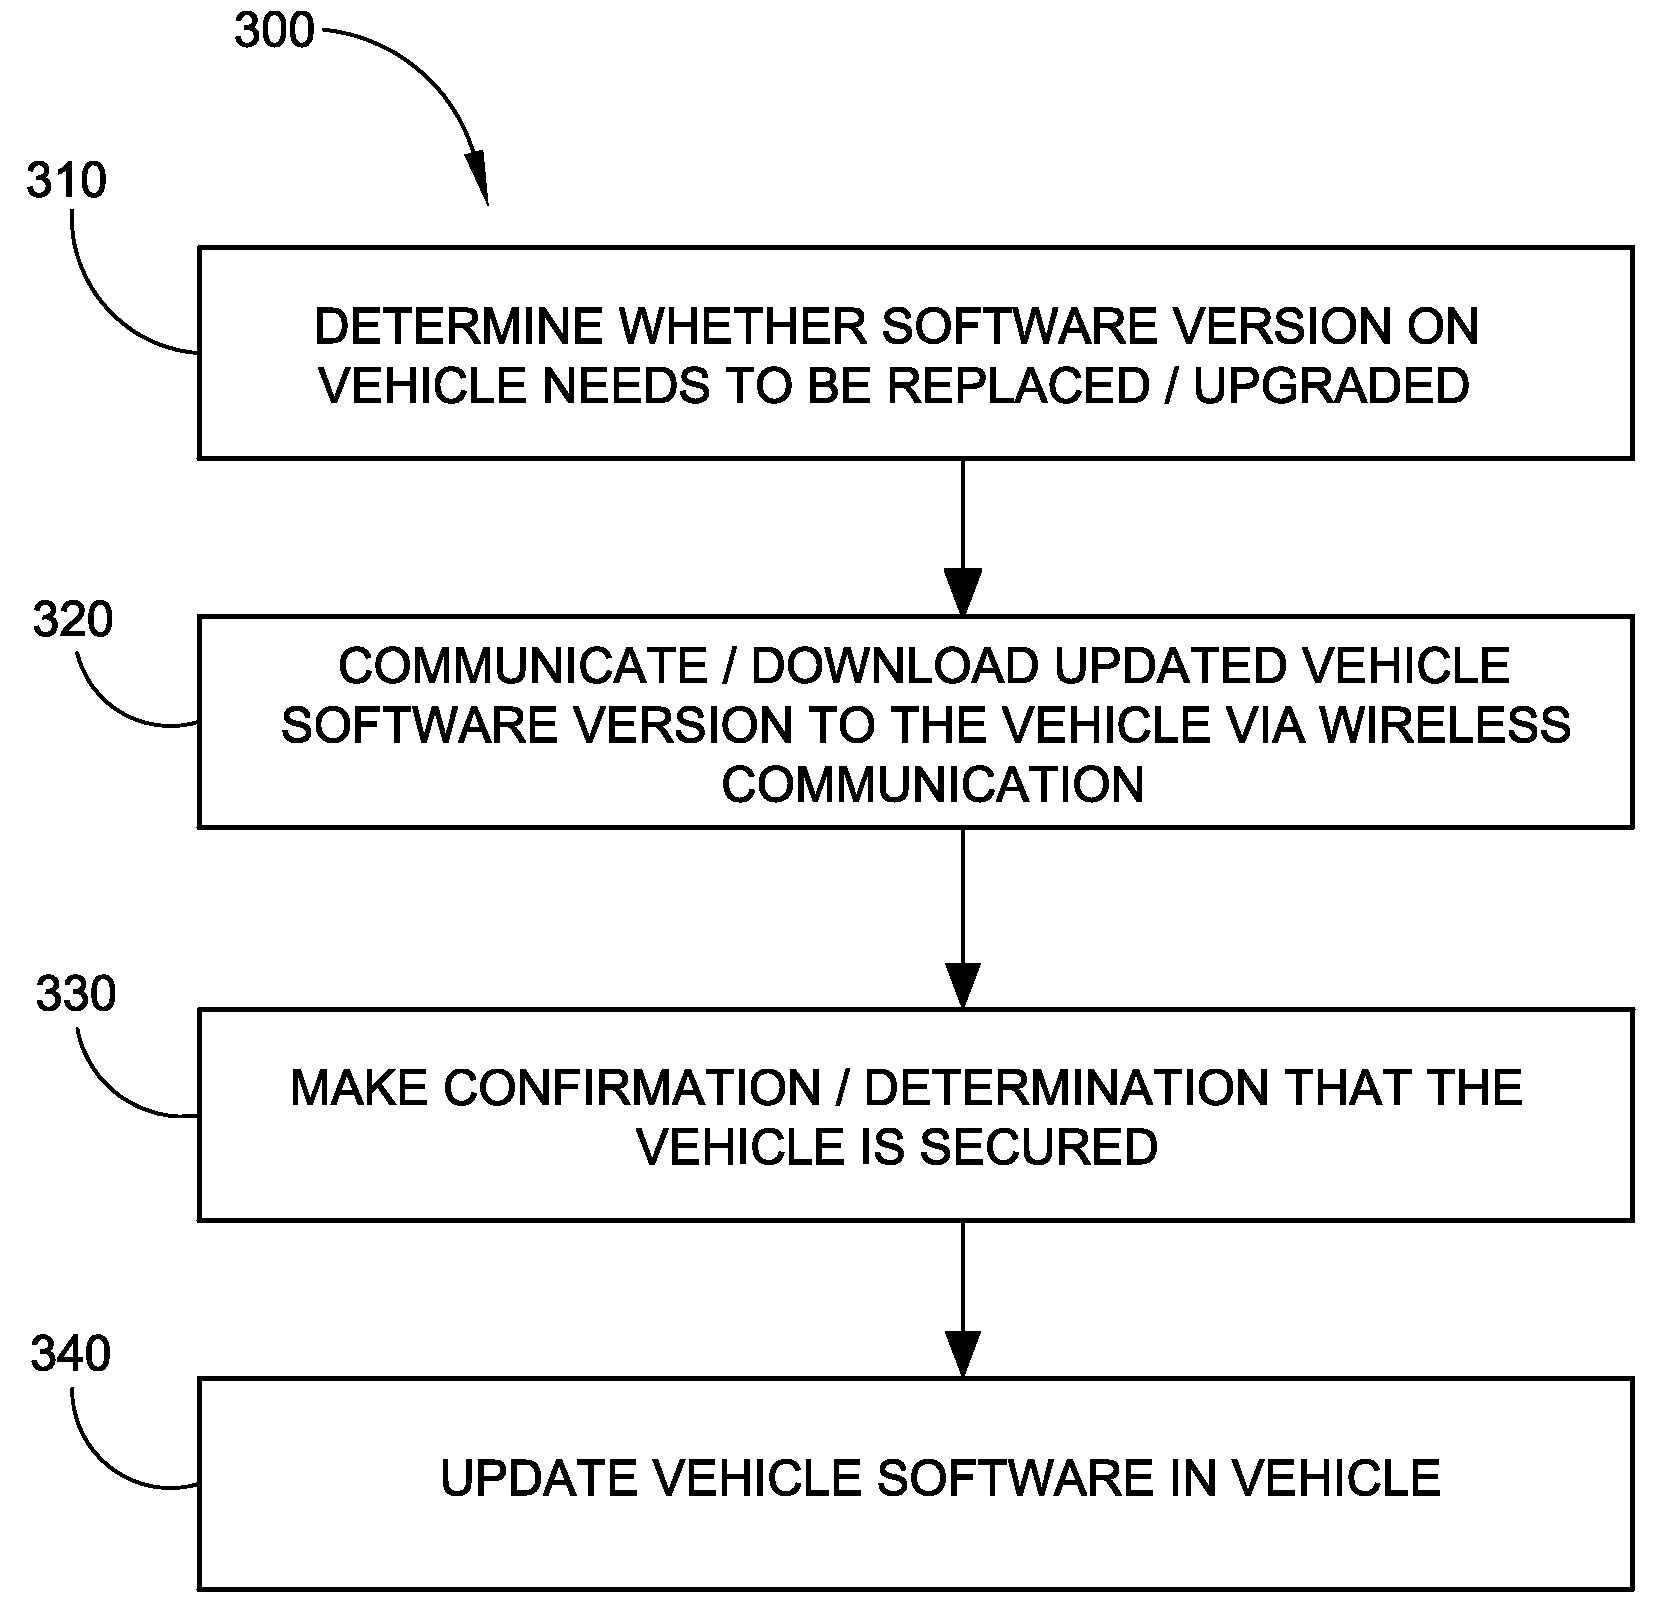 System and Method for Remotely Updating Control Software in a Vehicle With an Electric Drive System